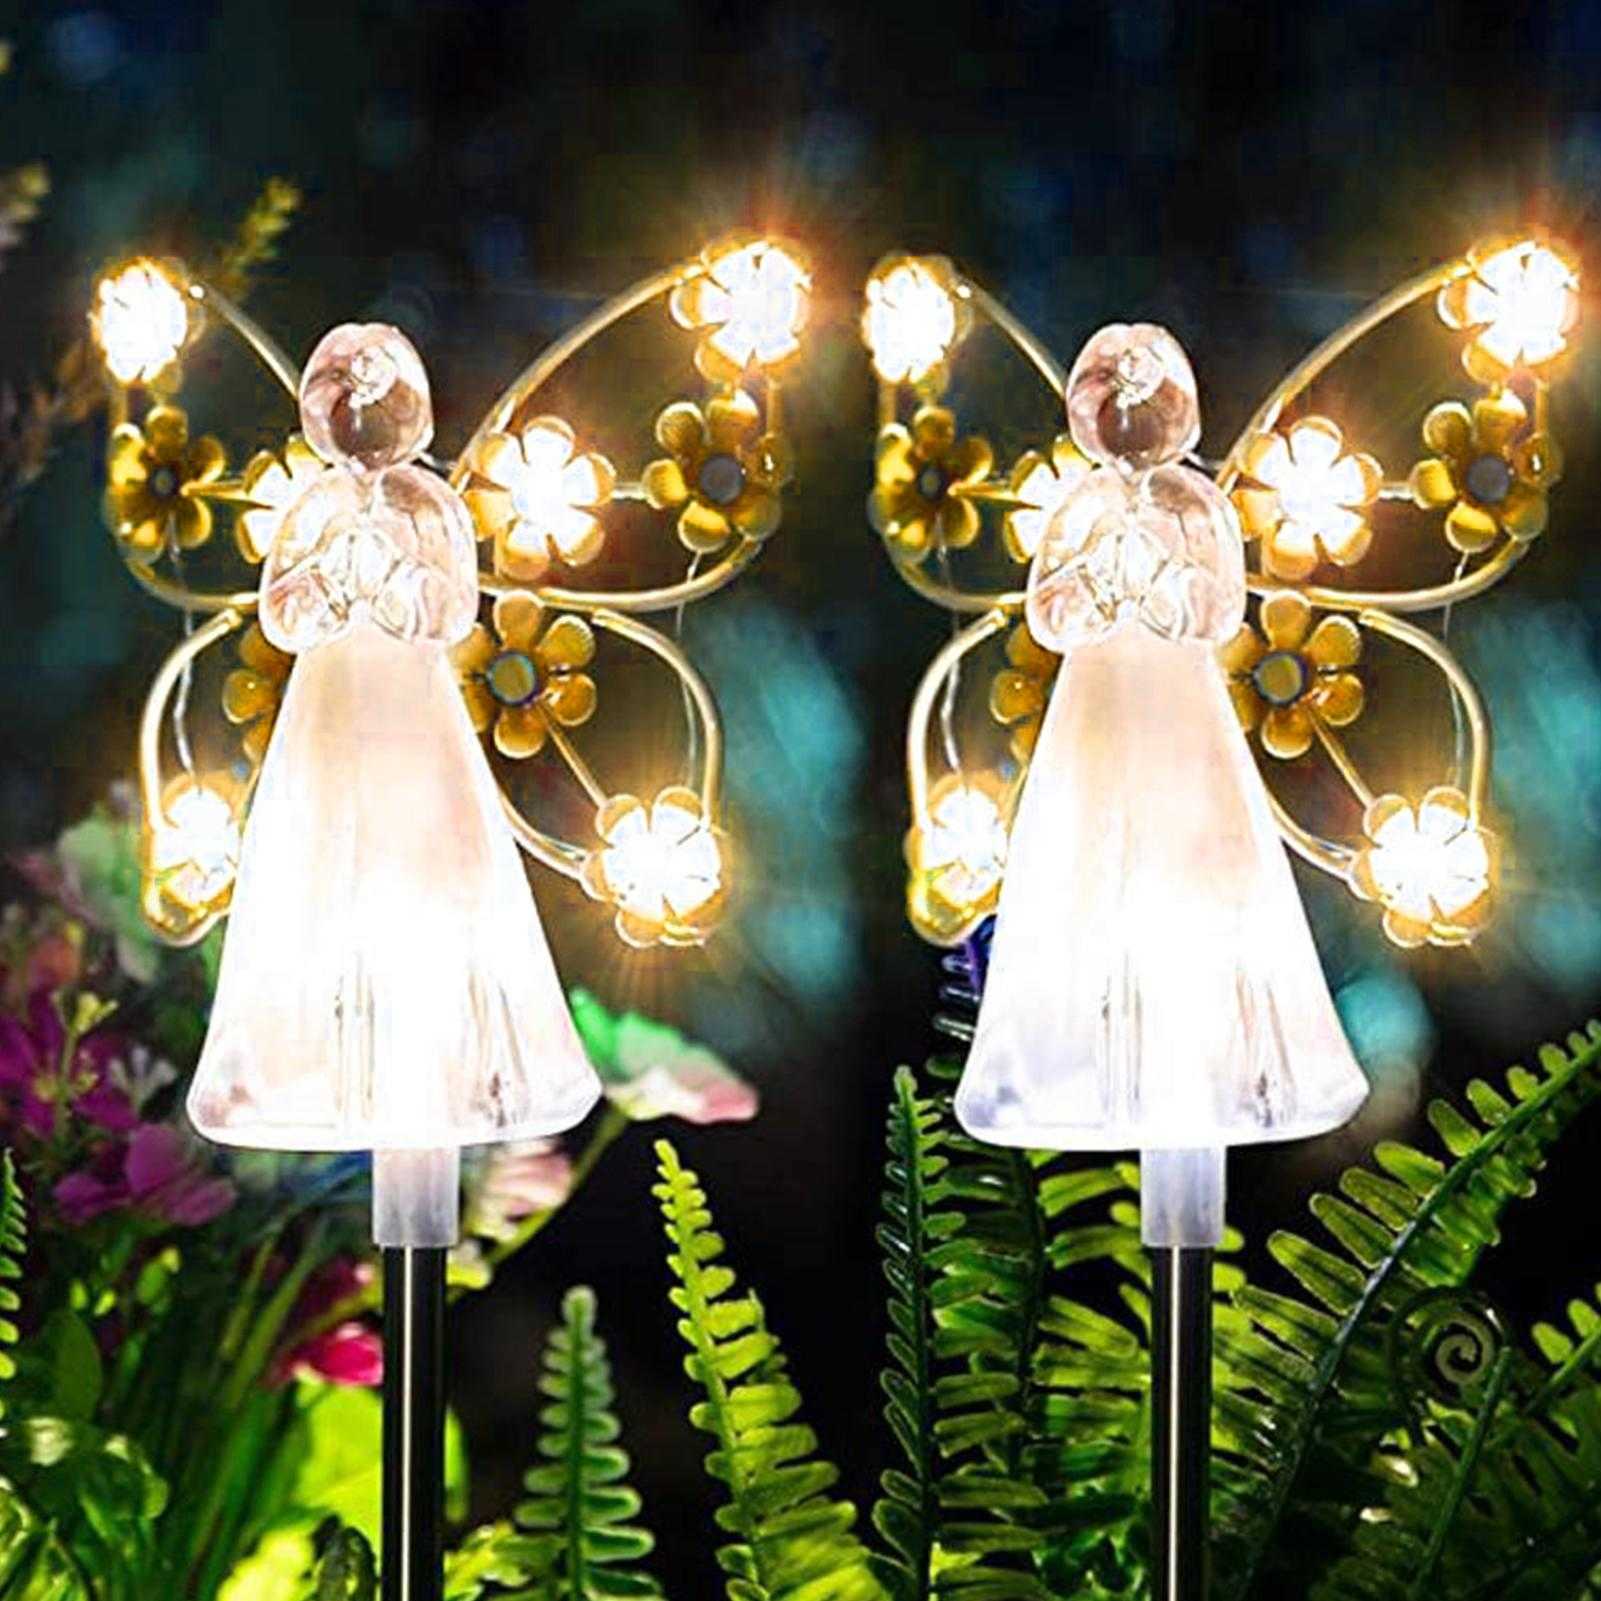 Novelty Lighting Solar Angel Lights Outdoor Garden Landscape Lamp Led Lights Stake Garden Lights for Yard Lawn Pathway Grave Cemetery Patio P230403